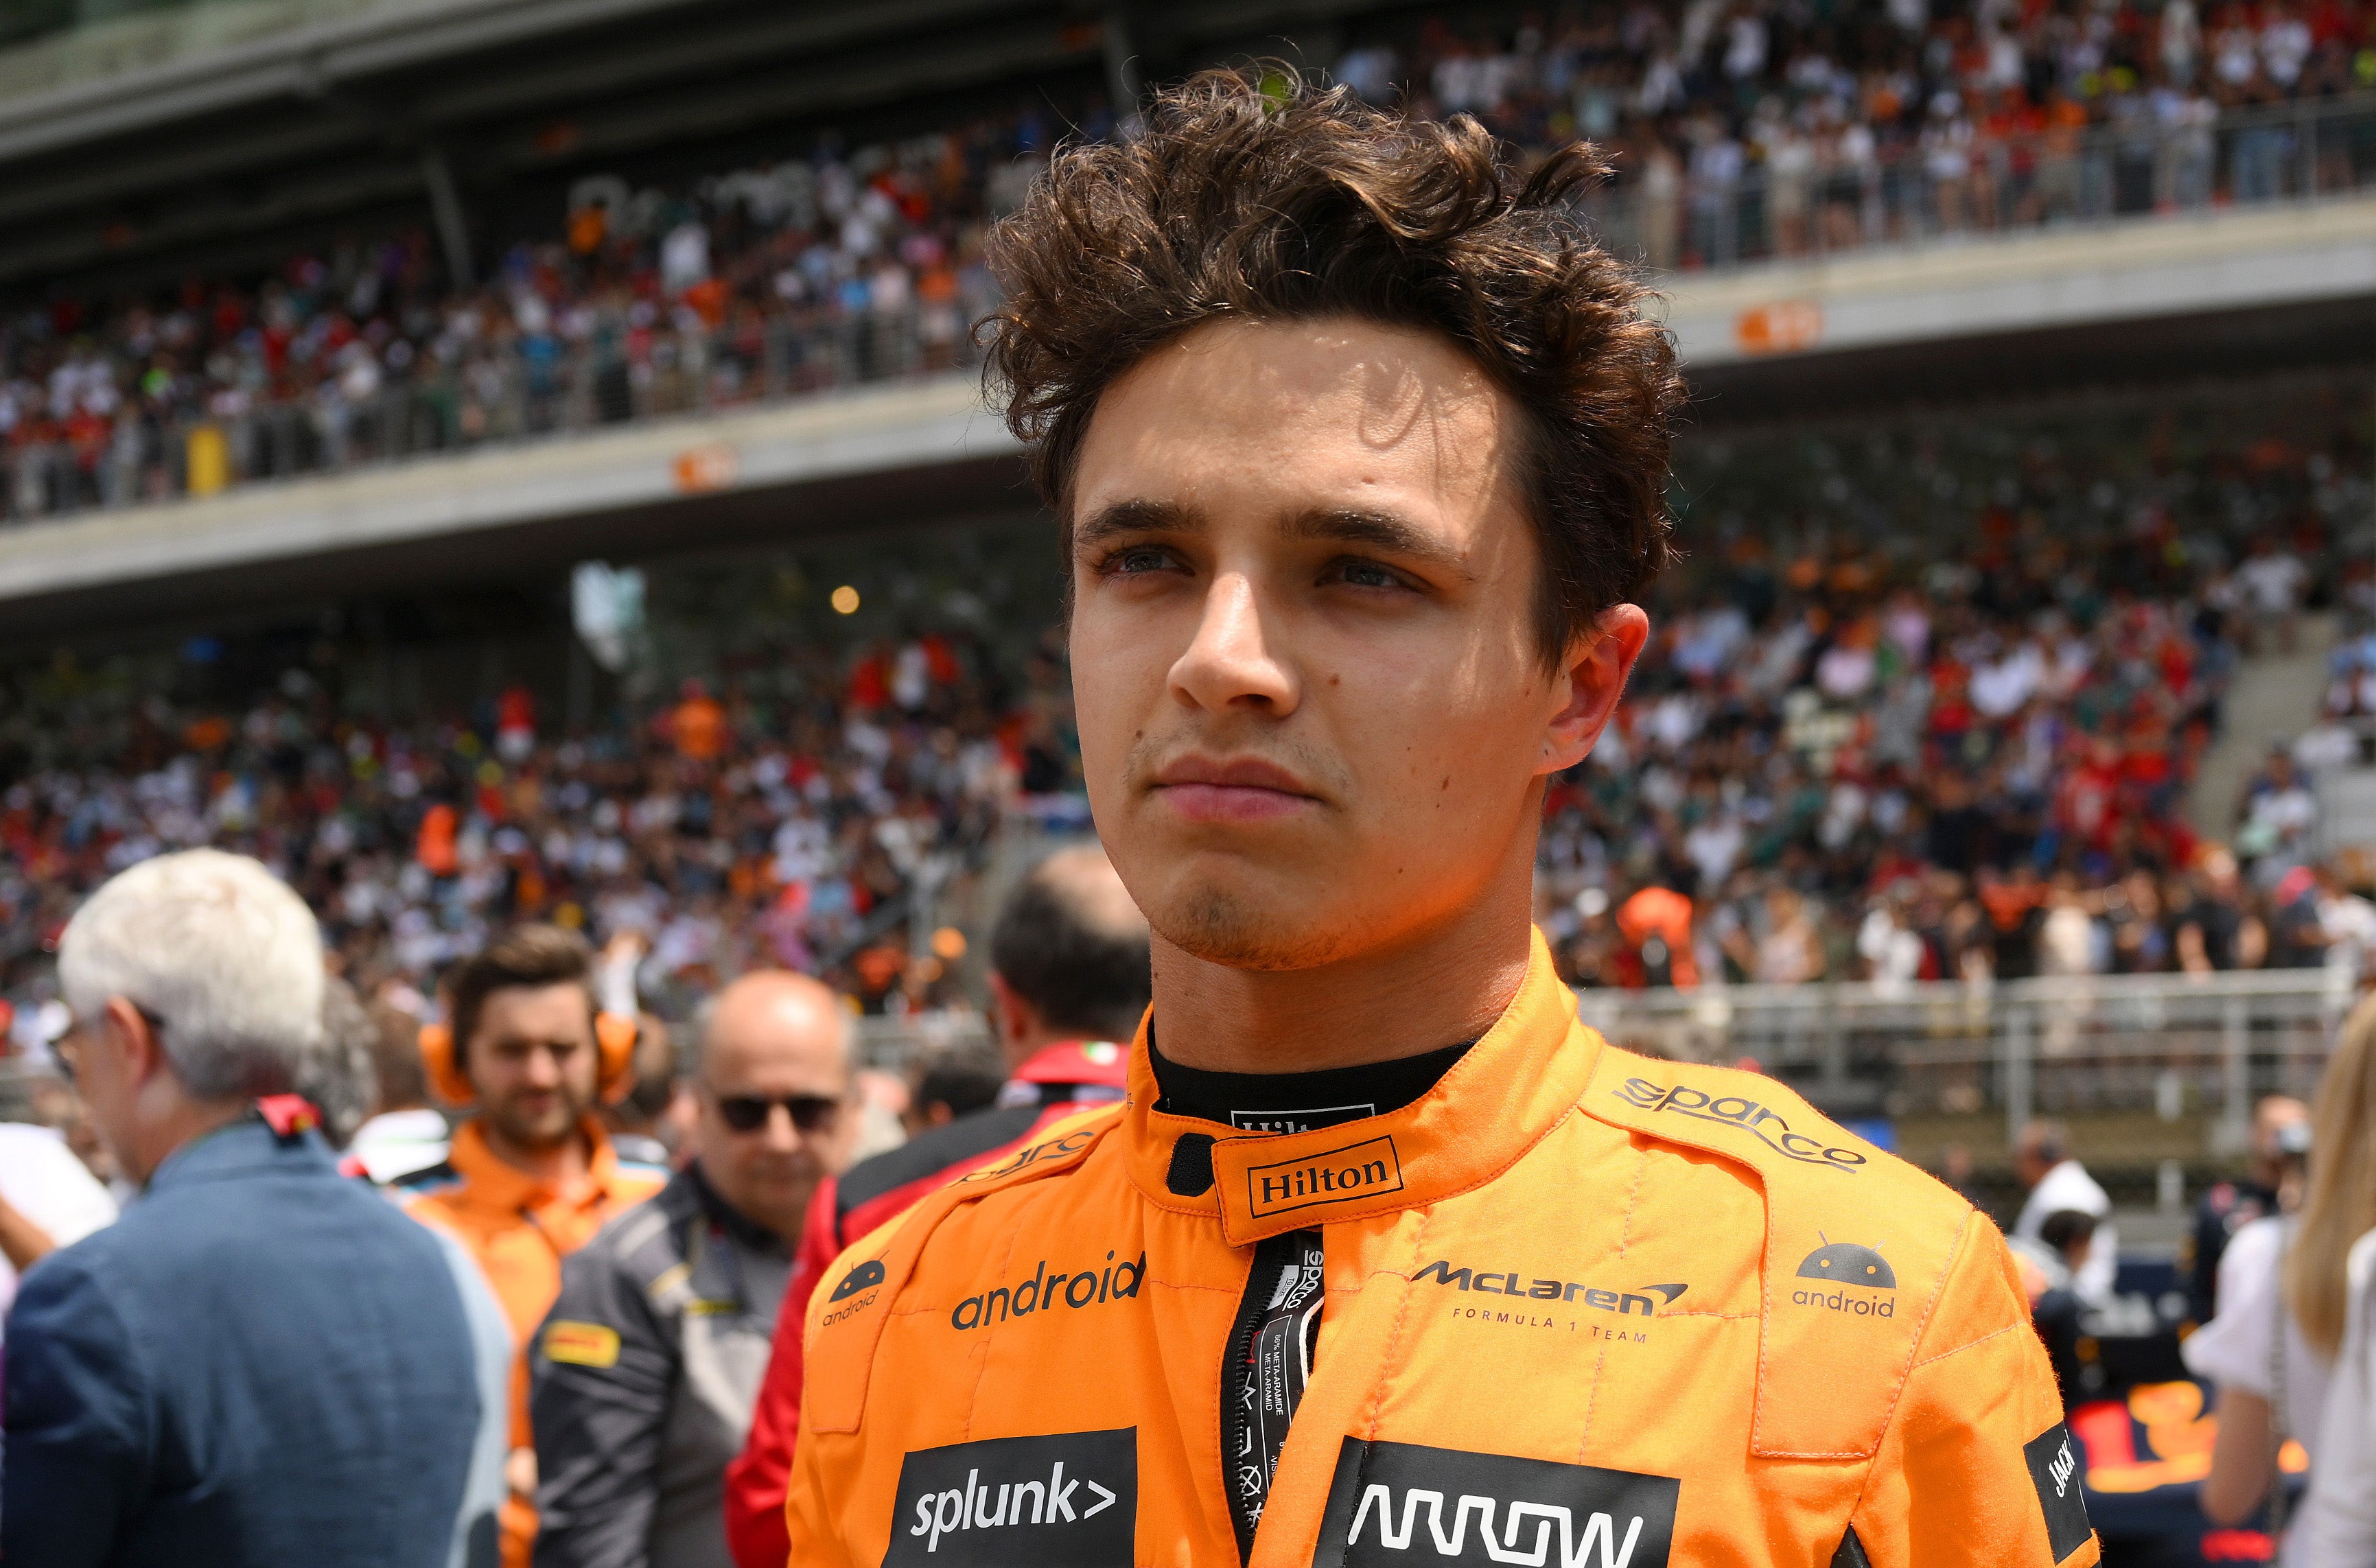 Lando Norris collided with Lewis Hamilton on the opening lap